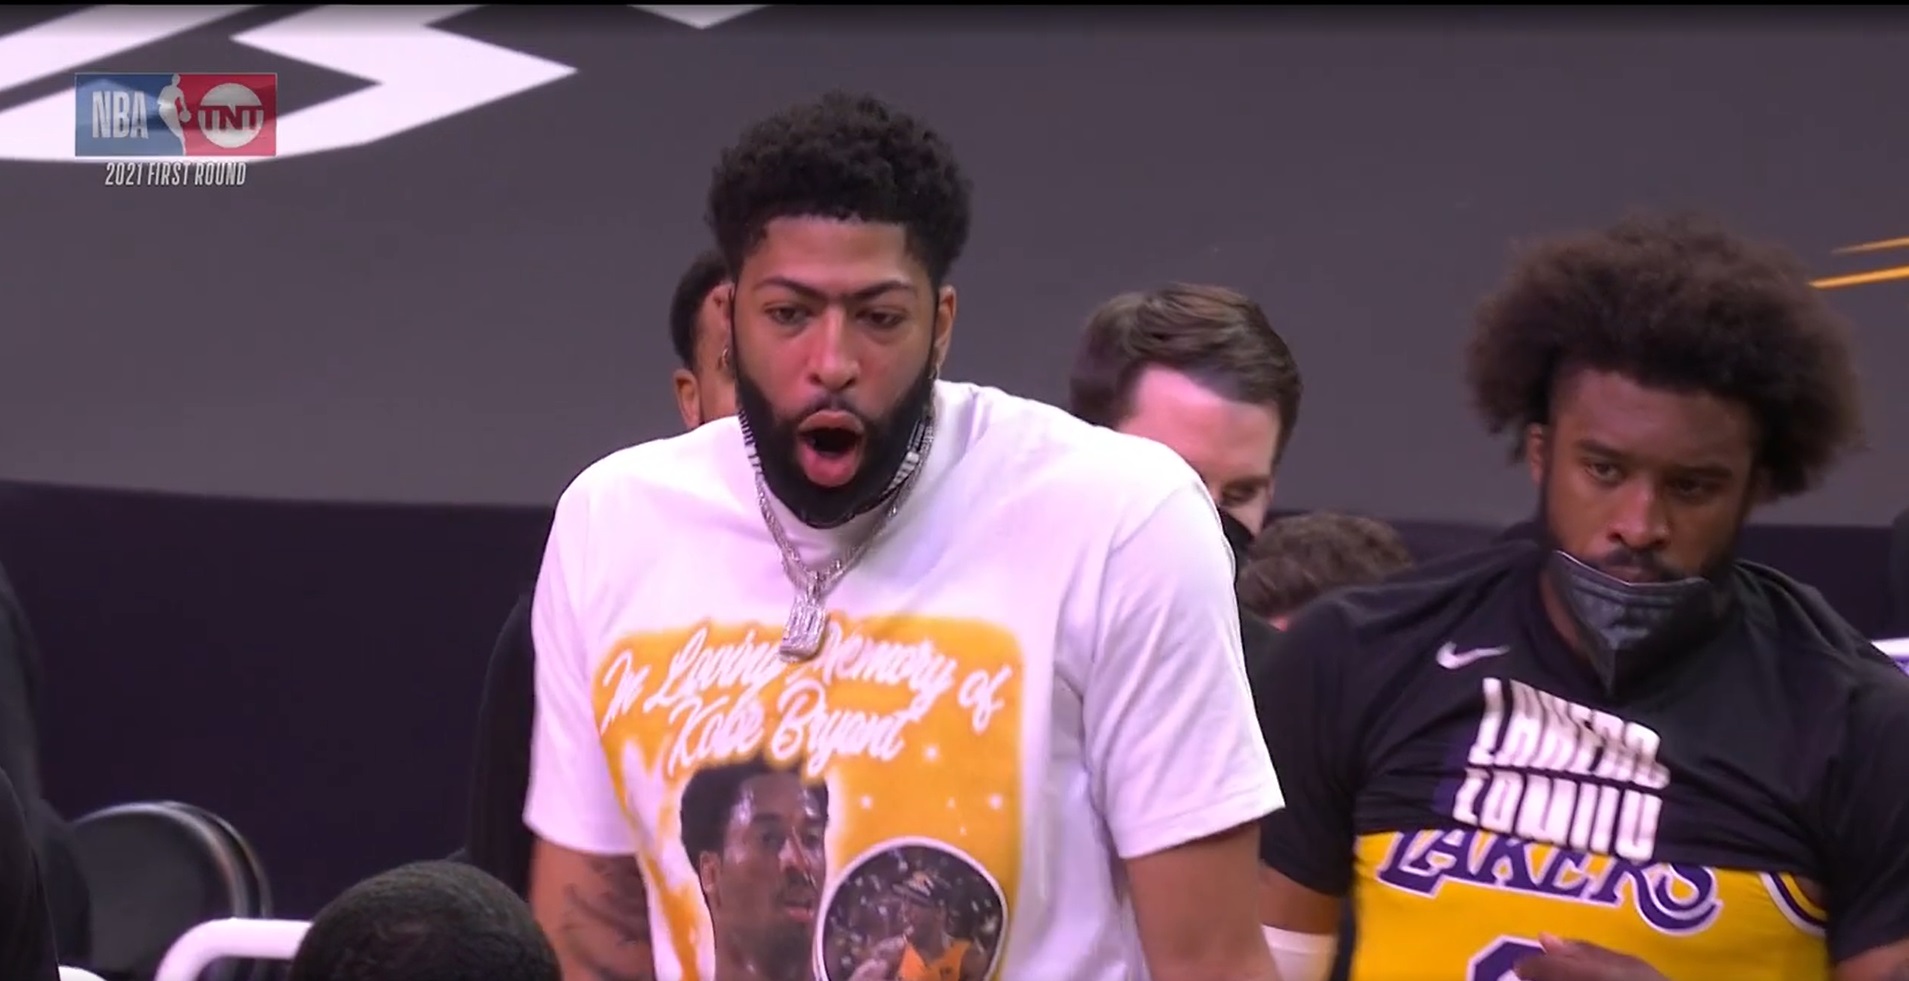 PHOTO Anthony Davis Wearing A T-Shirt That Says In Loving Memory Of Kobe Bryant During Game 5 Vs Suns